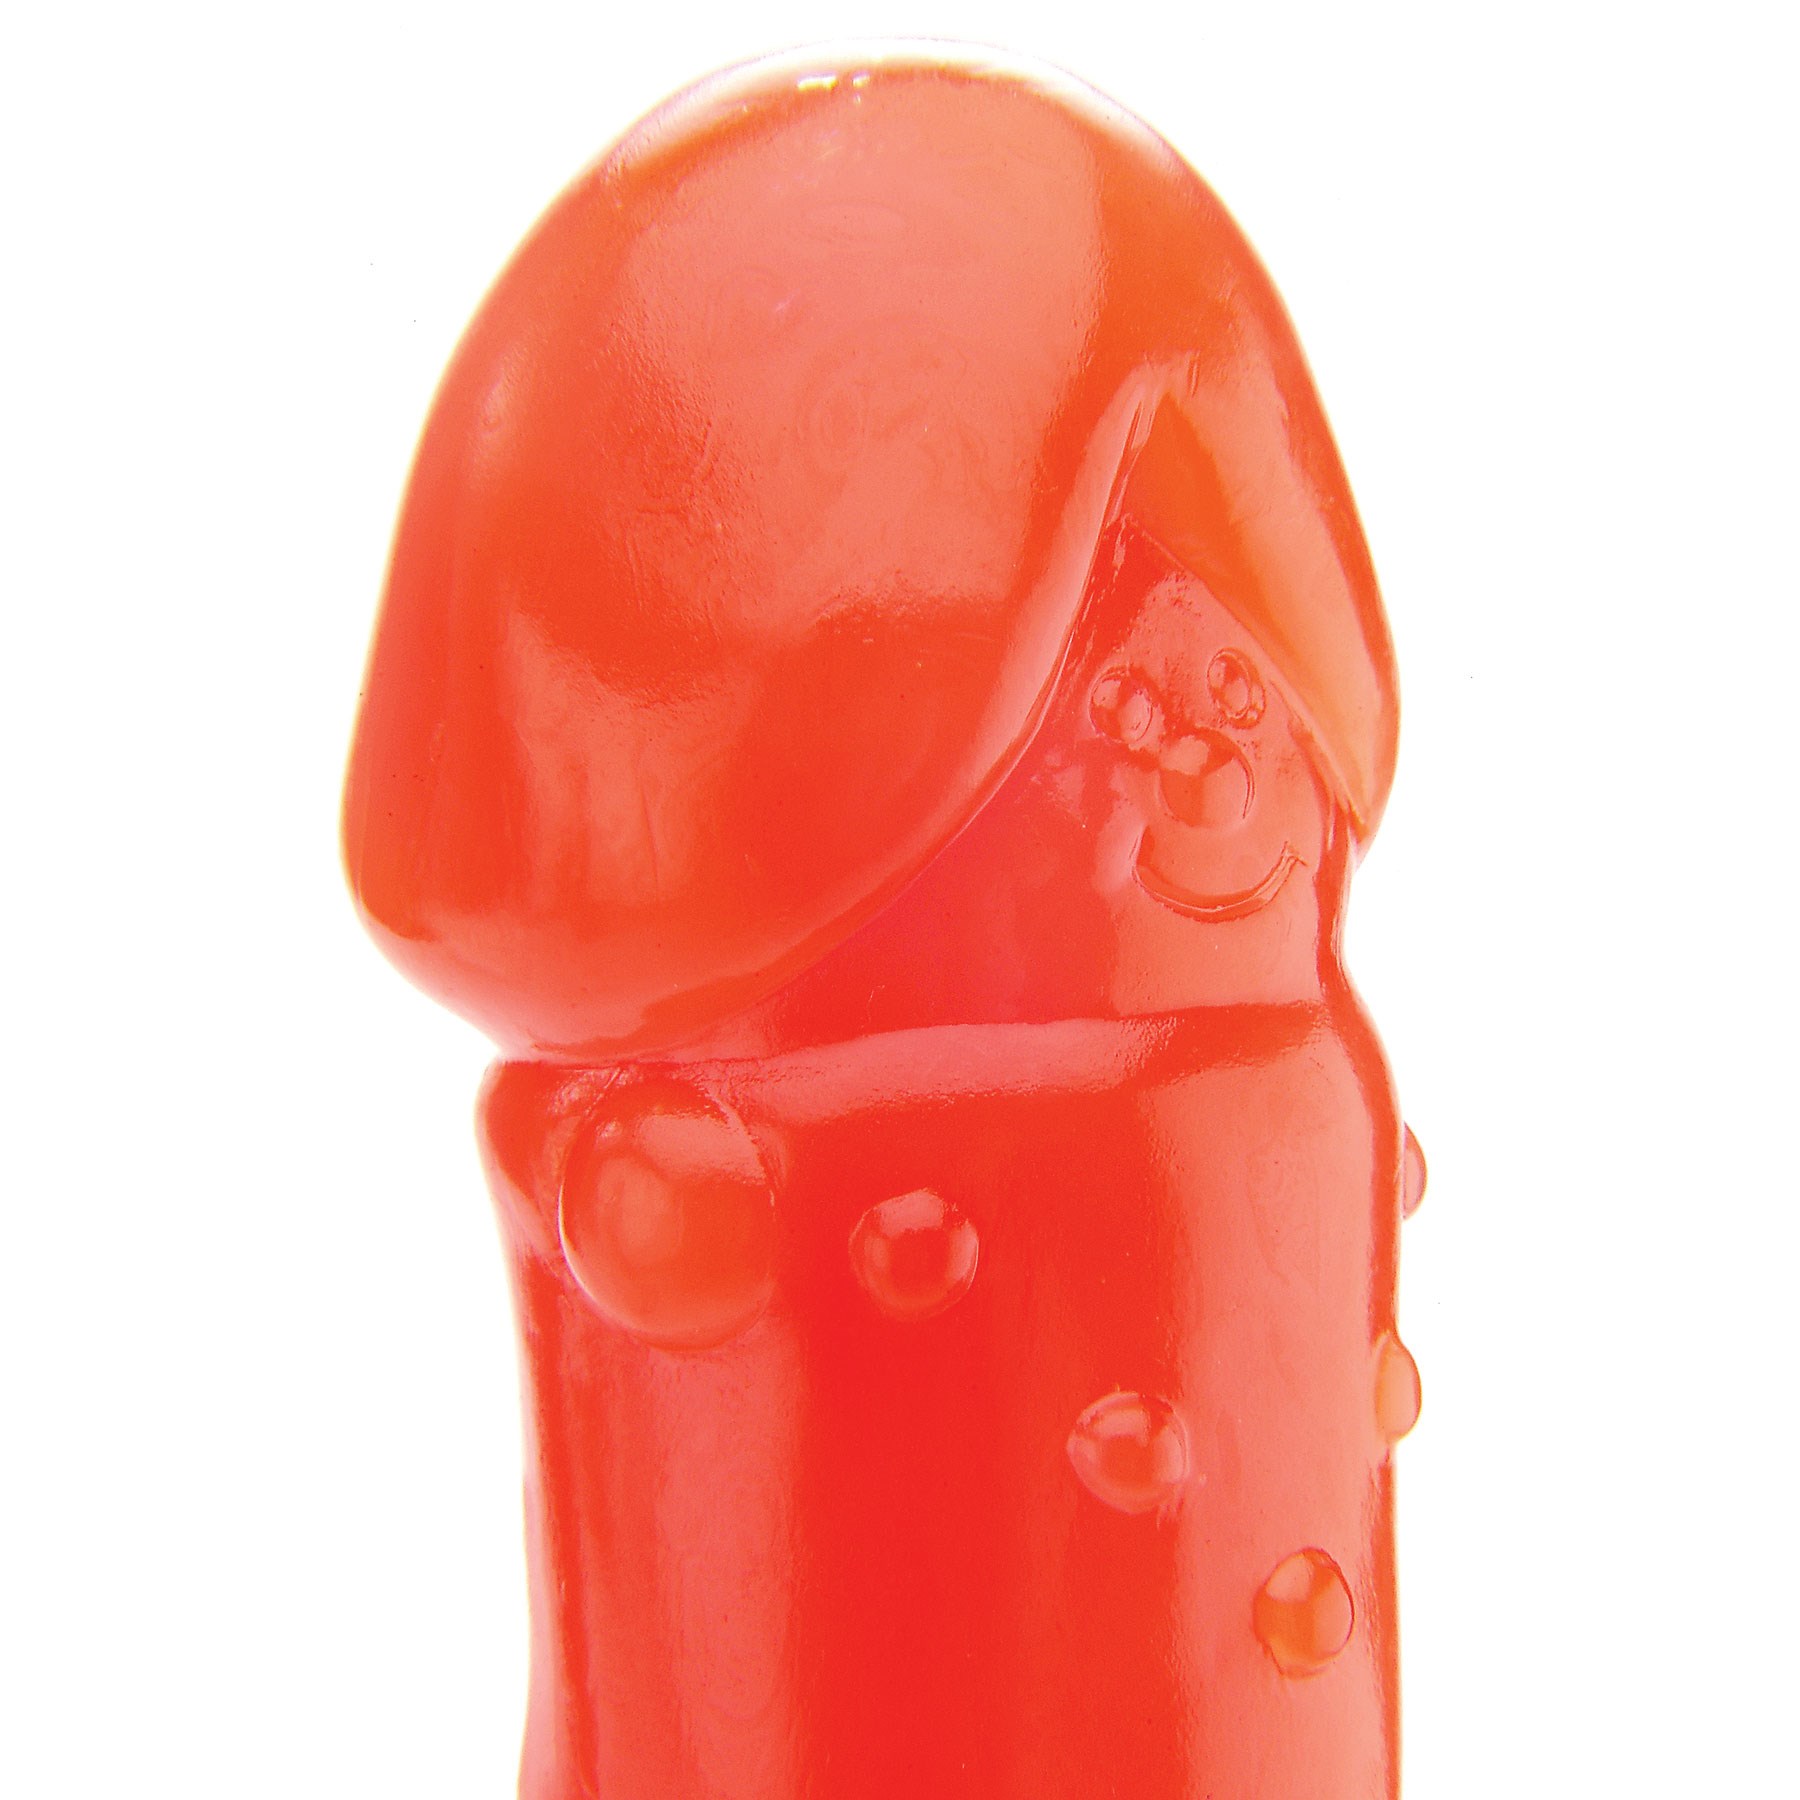 Deluxe Rotating Wallbangers Rabbit Vibrator close up of head